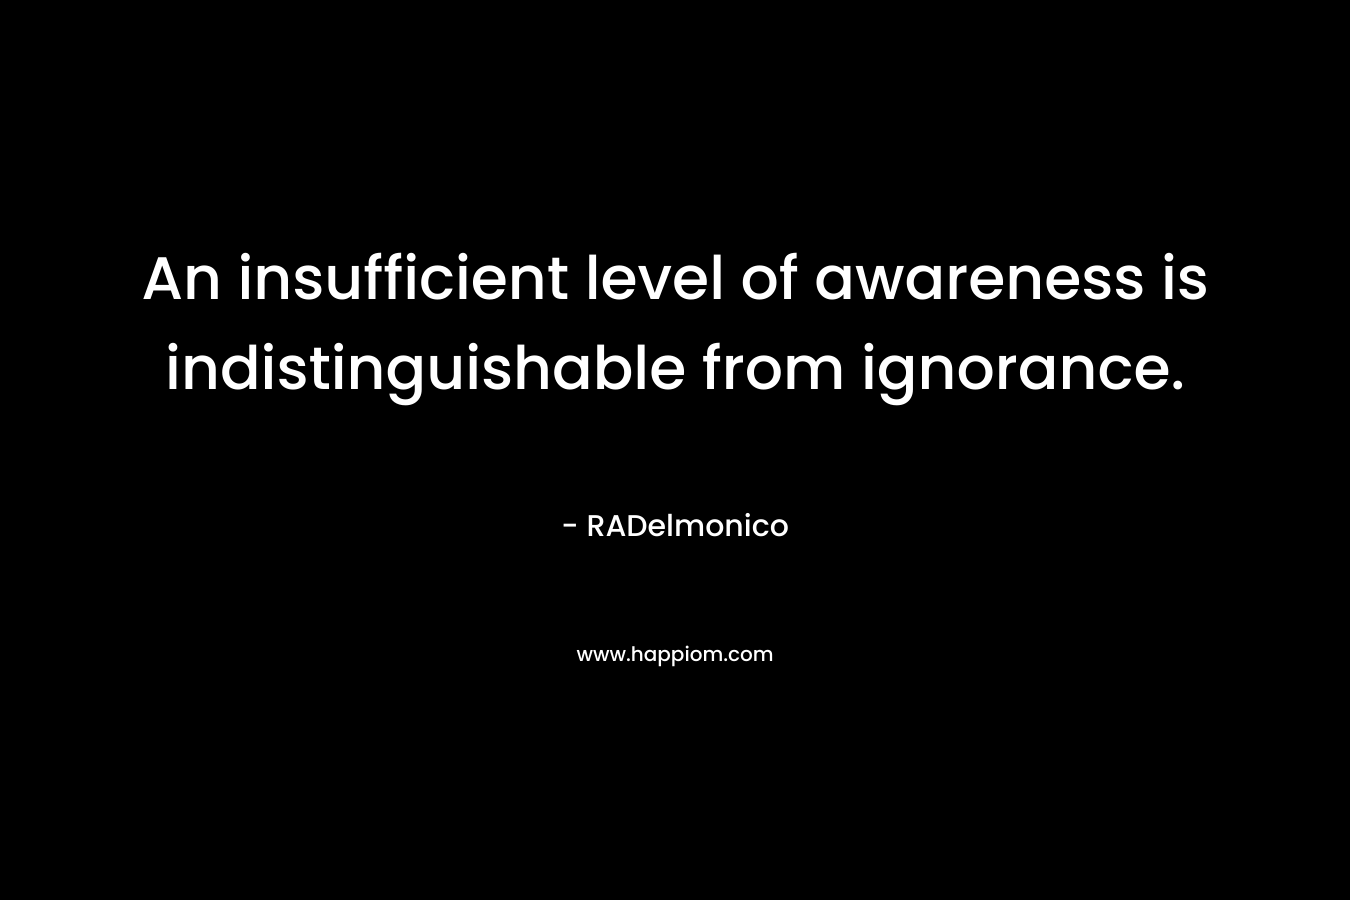 An insufficient level of awareness is indistinguishable from ignorance.